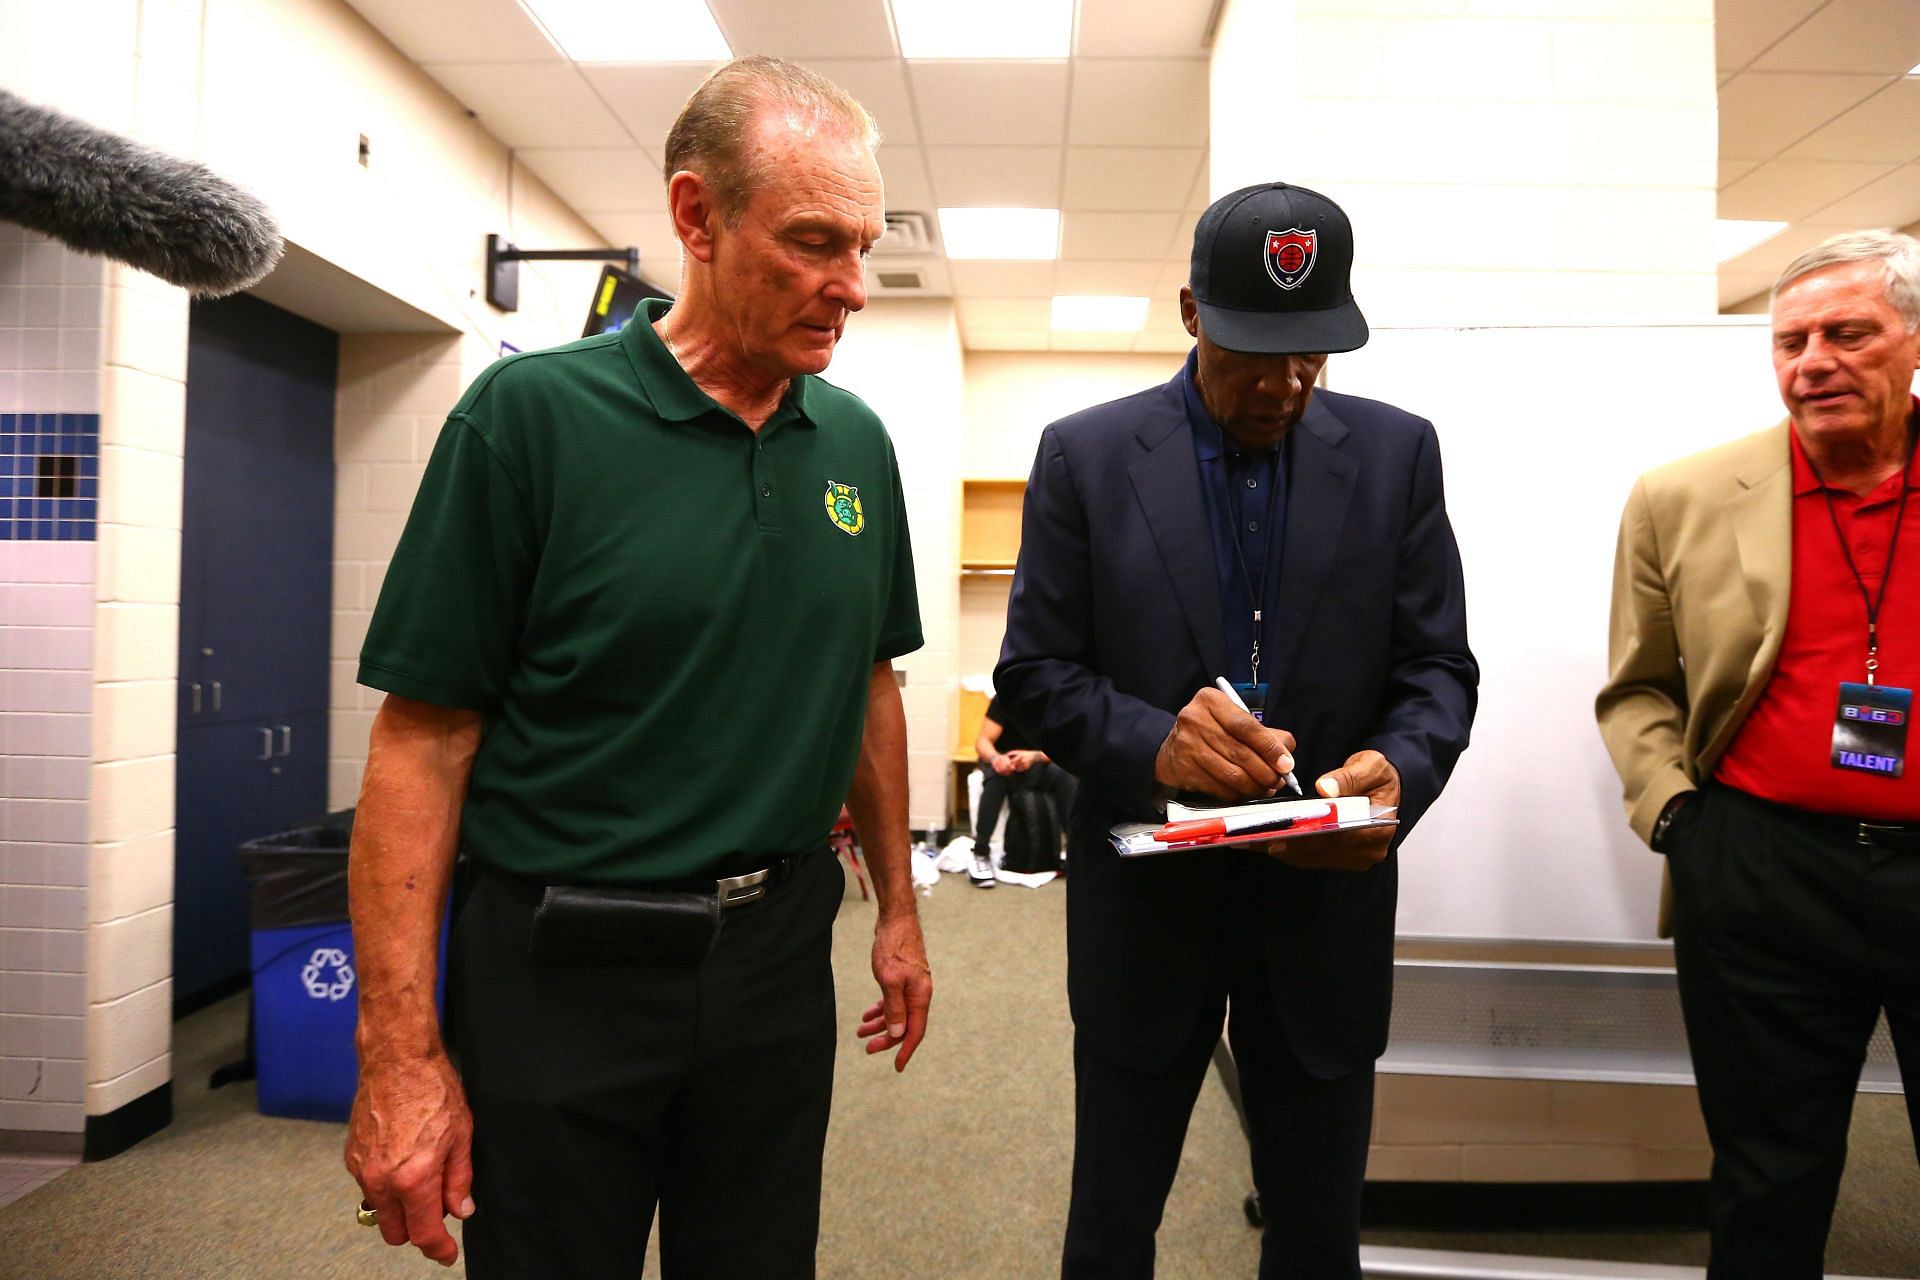 Rick Barry coaches the Ball Hogs team that plays in the BIG3